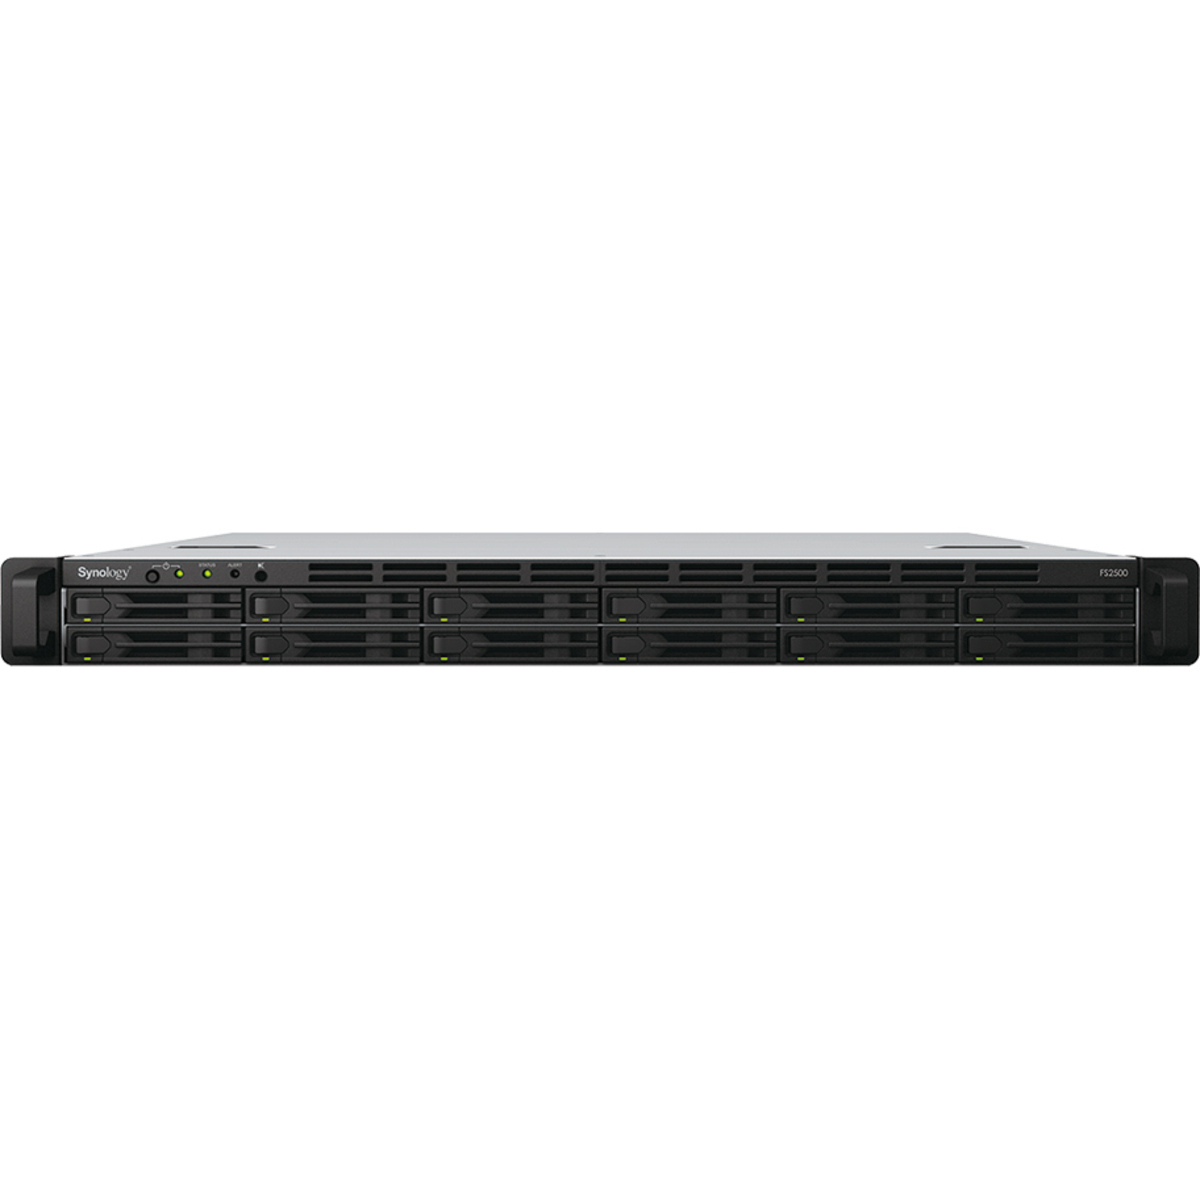 Synology FlashStation FS2500 24tb 12-Bay RackMount Large Business / Enterprise NAS - Network Attached Storage Device 12x2tb Samsung 870 EVO MZ-77E2T0BAM 2.5 560/530MB/s SATA 6Gb/s SSD CONSUMER Class Drives Installed - Burn-In Tested - FREE RAM UPGRADE FlashStation FS2500